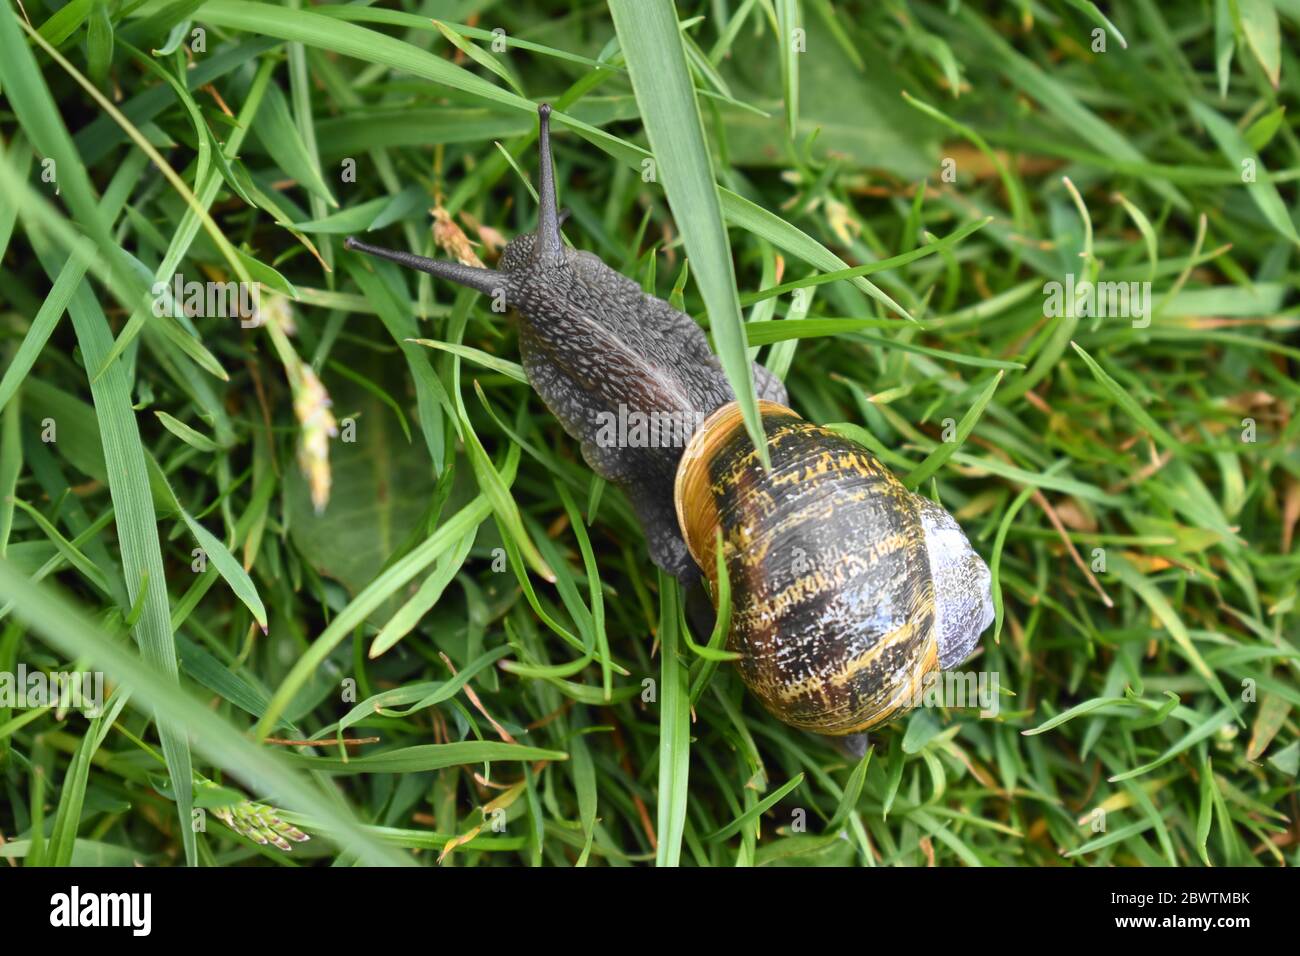 Grey snail with spiral shell and extended antennae moving right to left in long grass Stock Photo